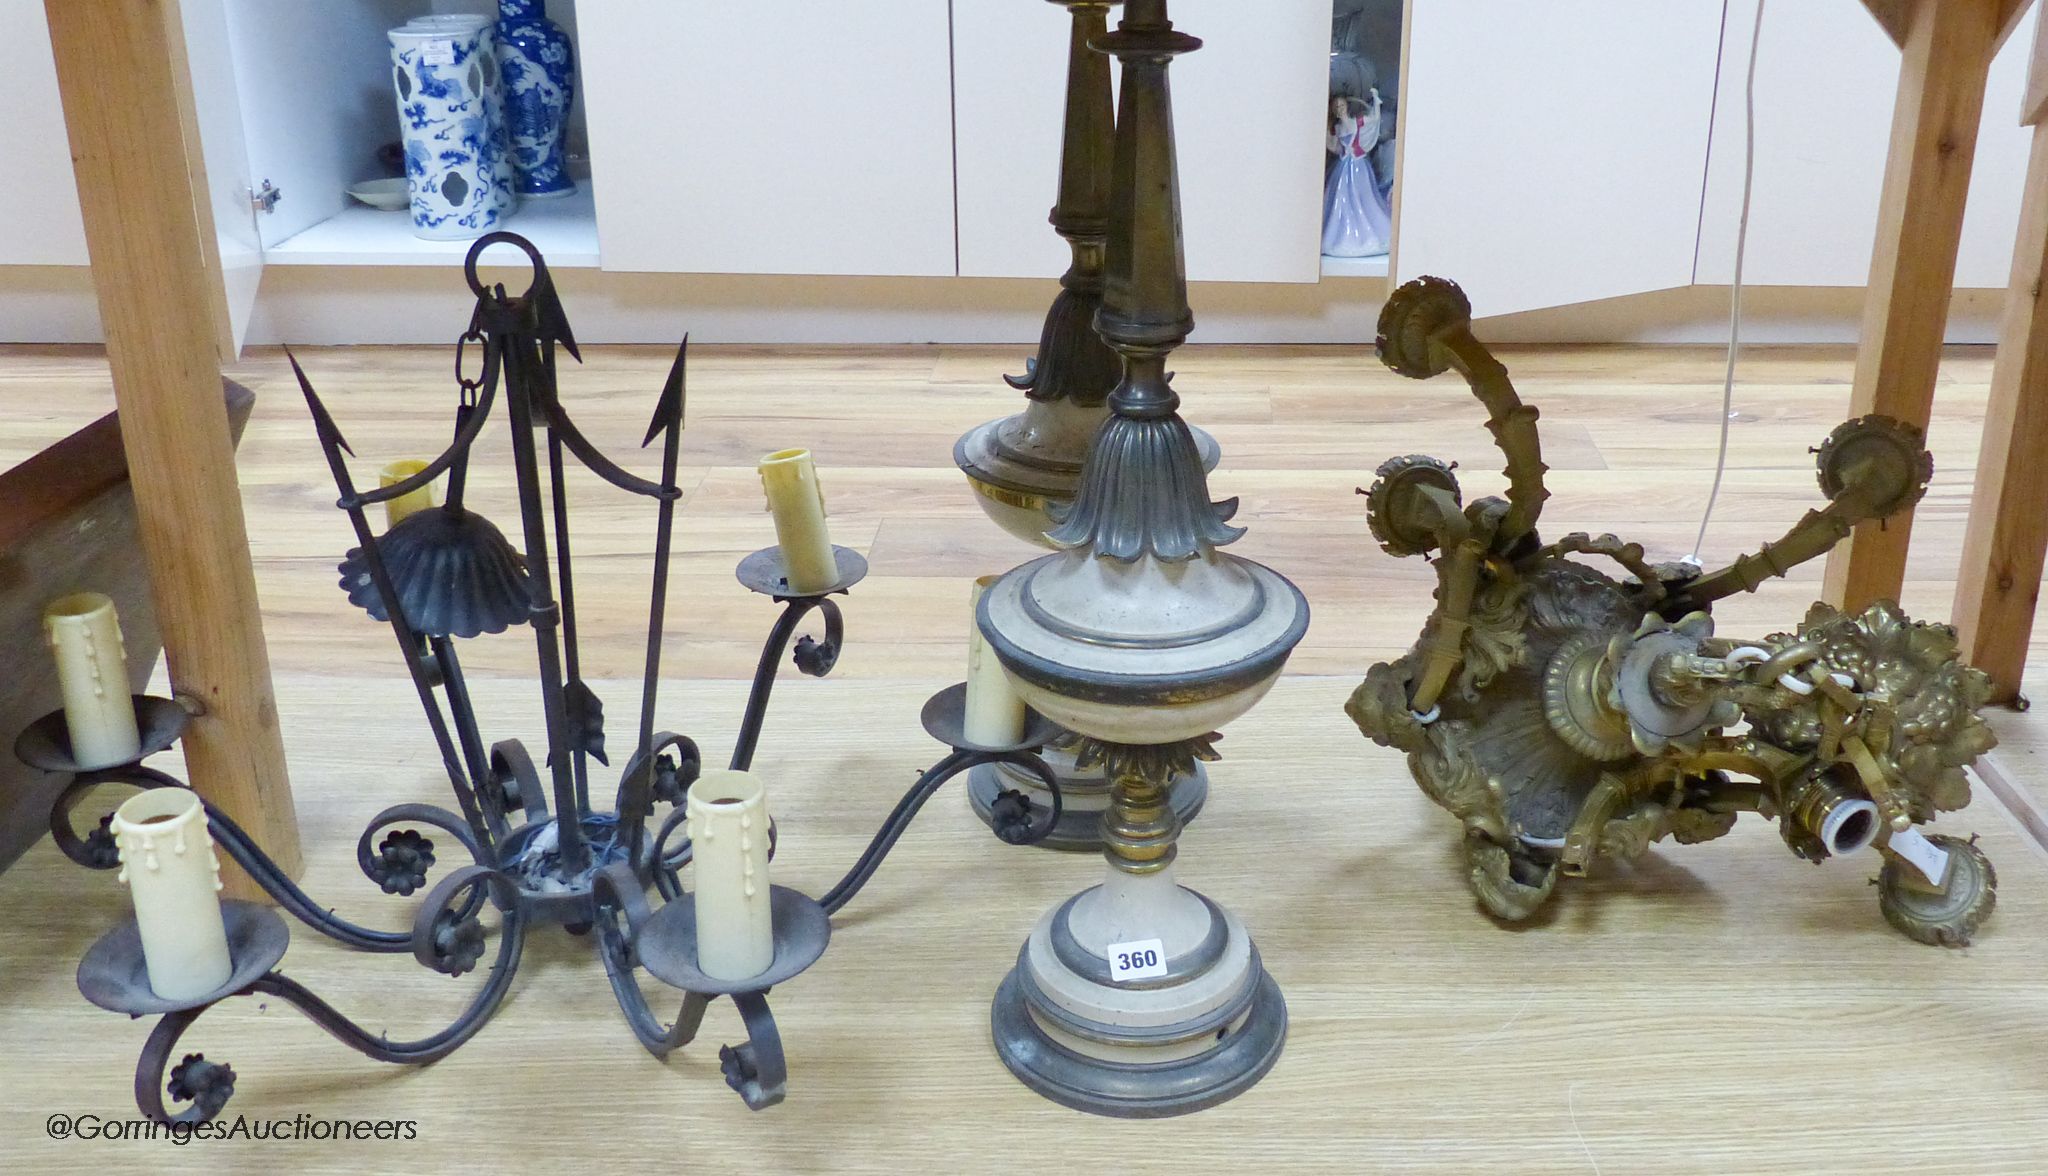 A cast brass electrolier, an ironwork exampleband a pair of table lamps